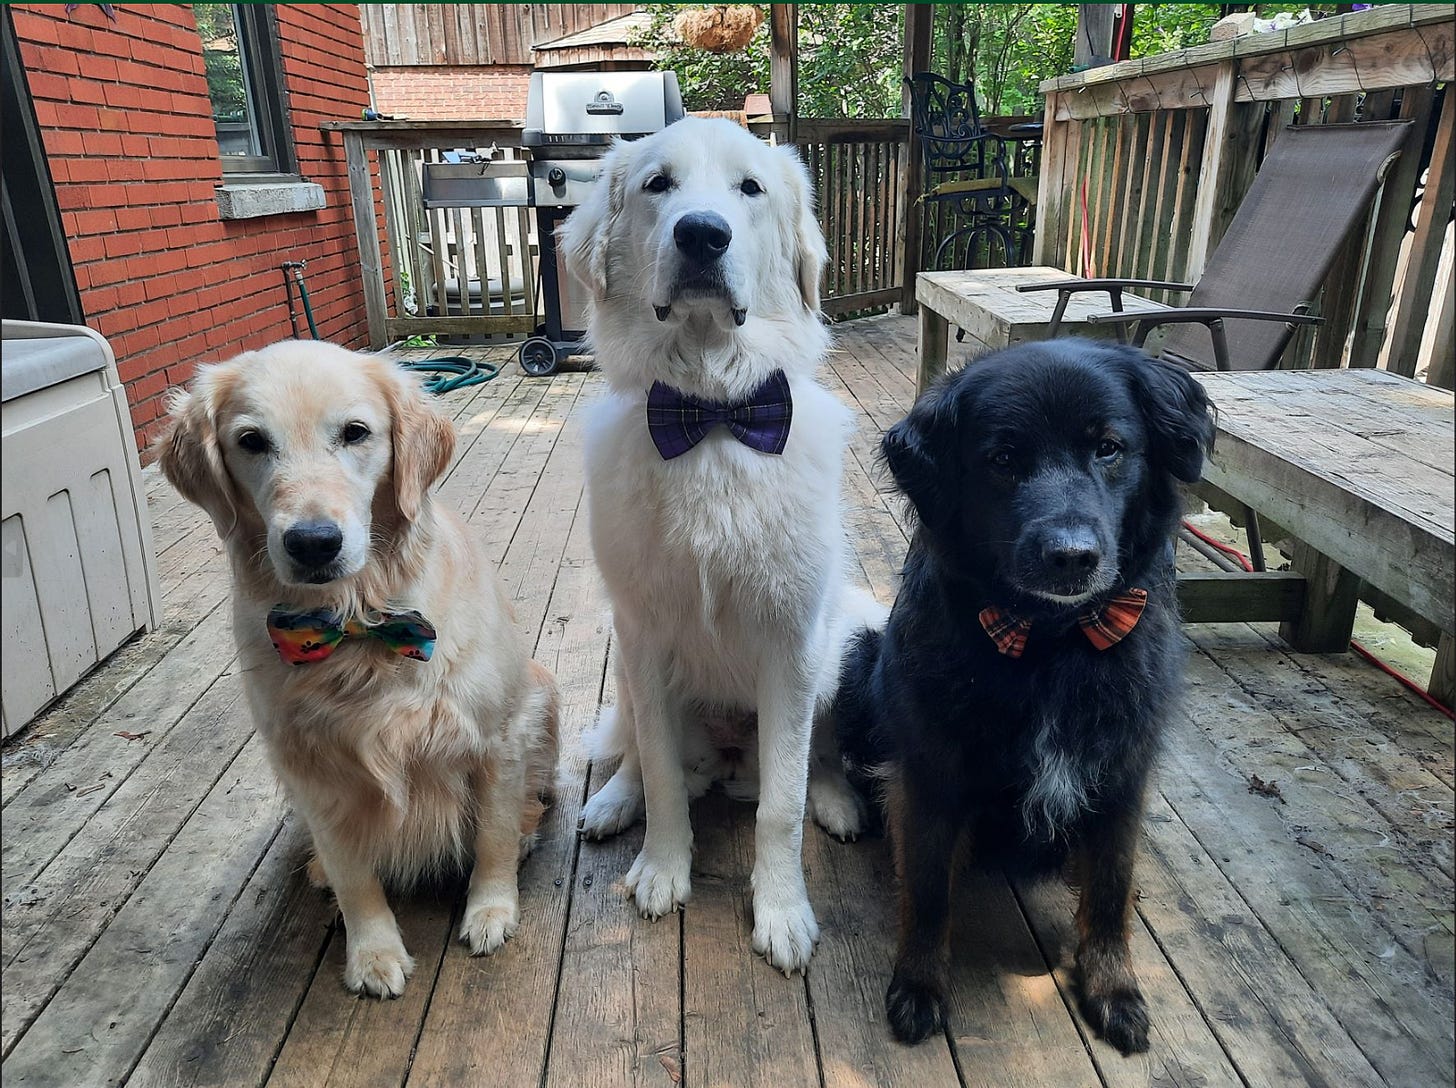 three dogs, one golden, one white, and one black, all wearing bowties